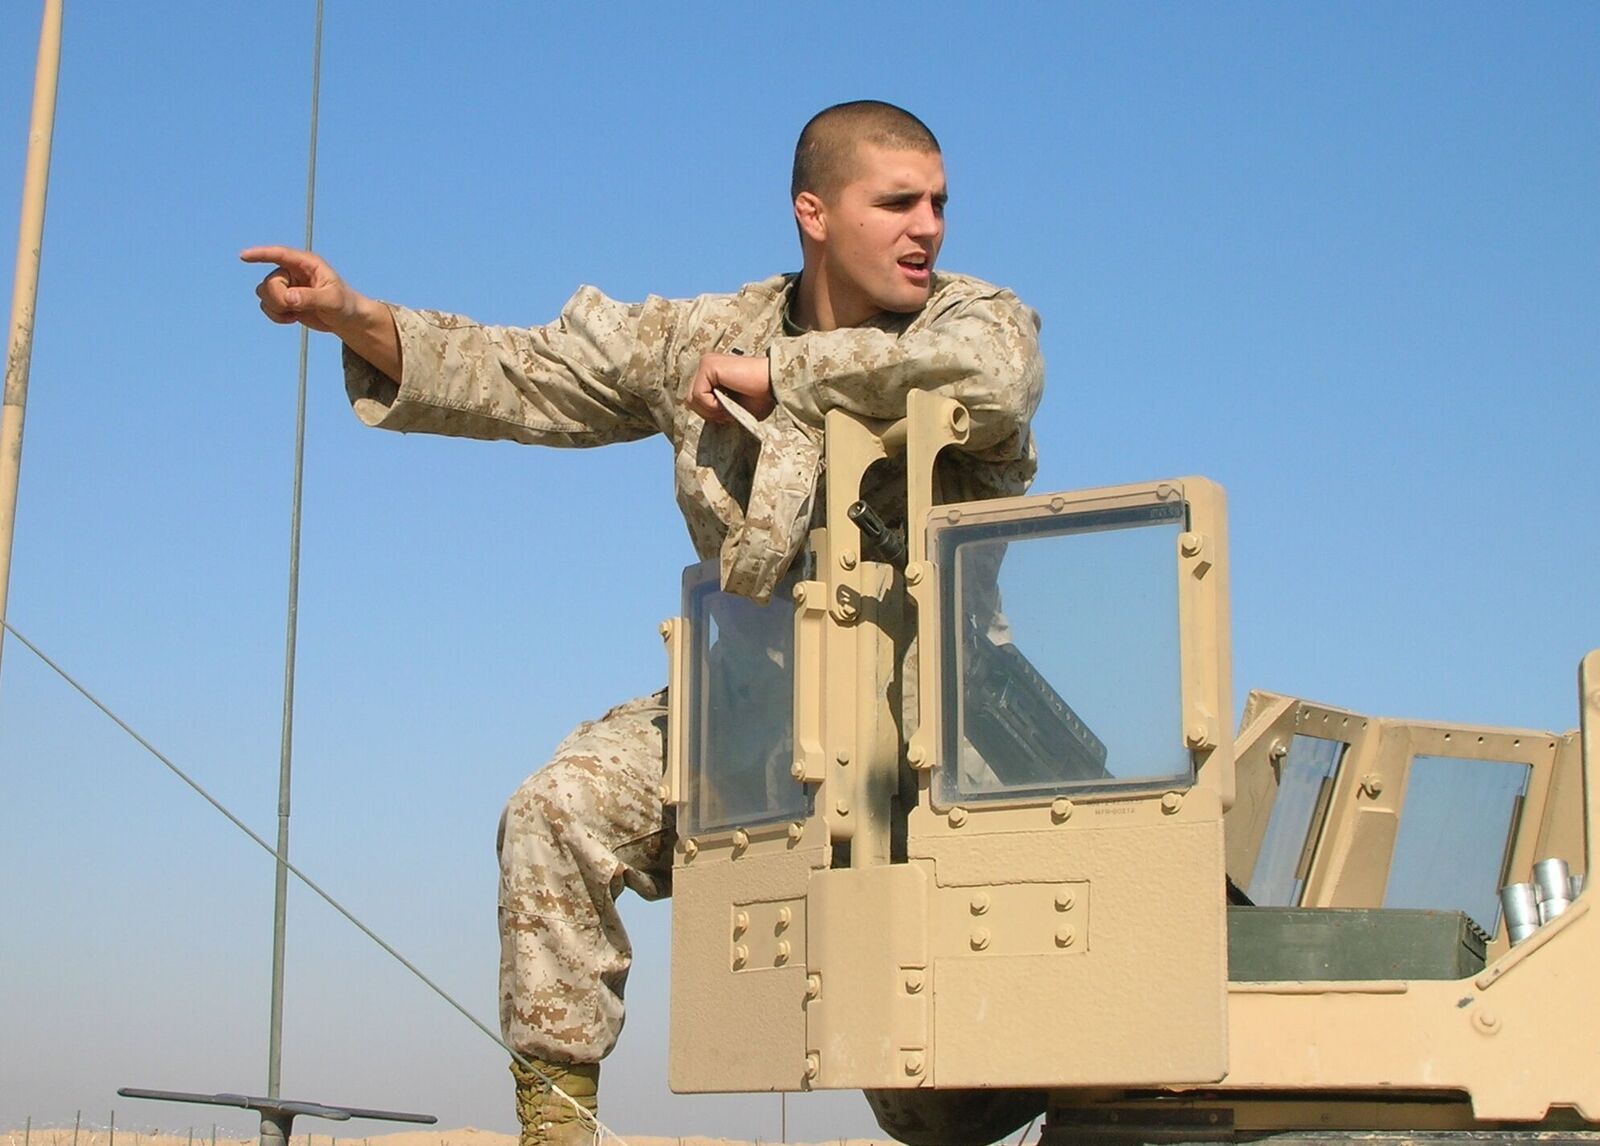 First Lt. Travis Manion was on his second tour to Iraq when killed by a sniper in April 2007. Manion was drawing fire away from wounded team members when he and fellow Marines and Iraqi Army counterparts were ambushed in the Al Anbar province of Iraq. (Courtesy Travis Manion Foundation)